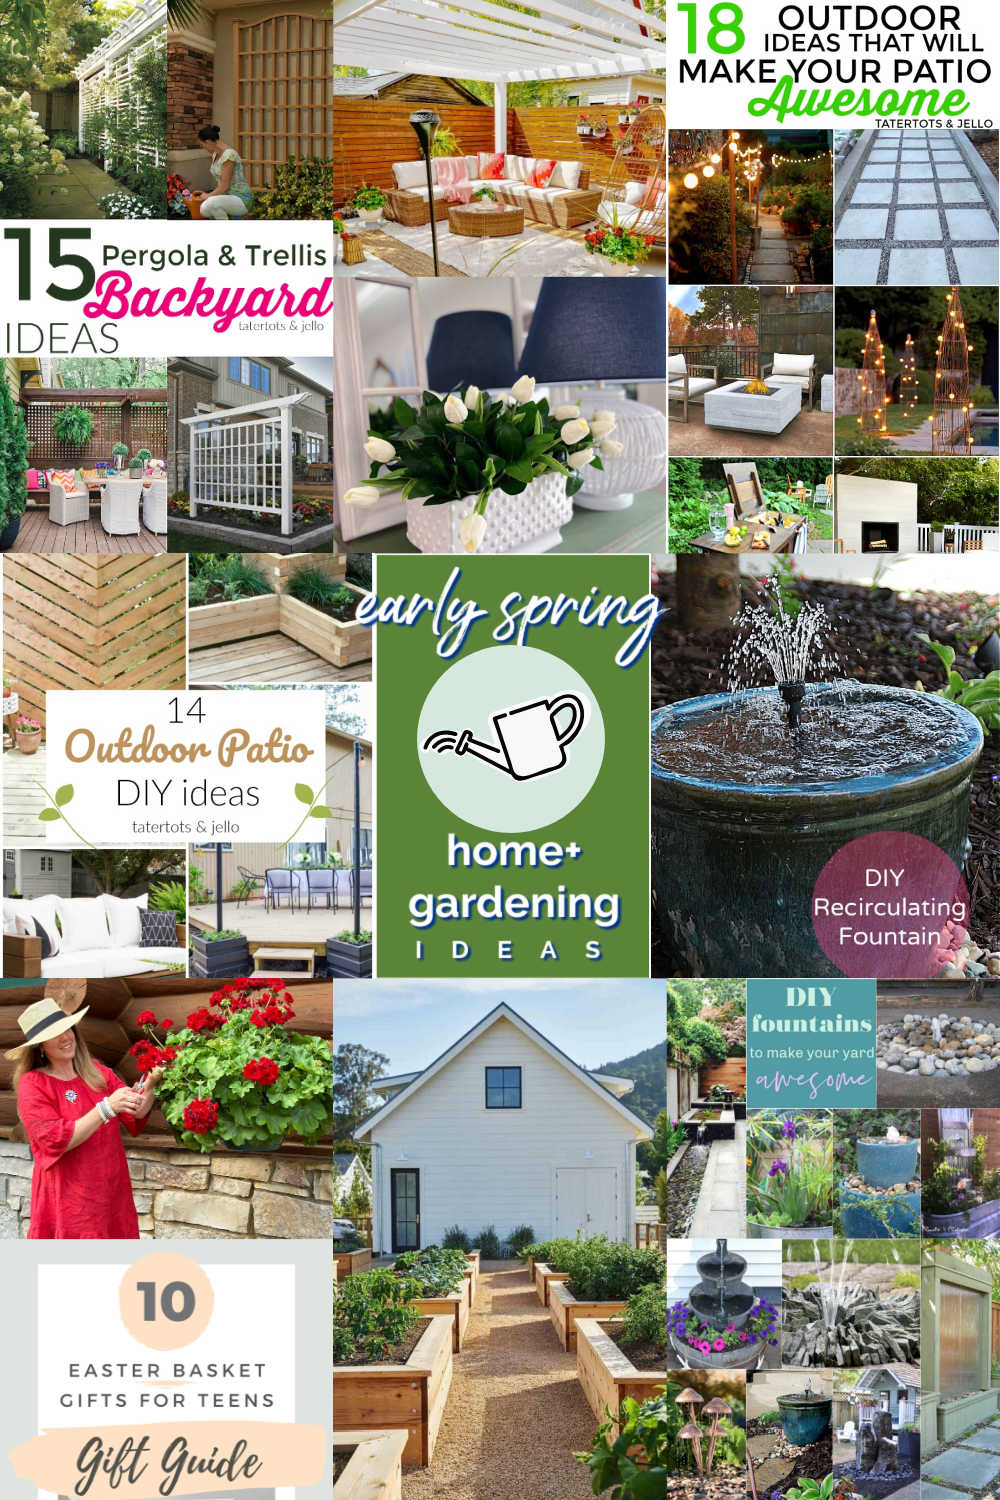 Early Spring Home and Gardening Ideas. Discover a plethora of creative and budget-friendly DIY gardening and yard ideas to transform your outdoor space into a blooming haven this spring.